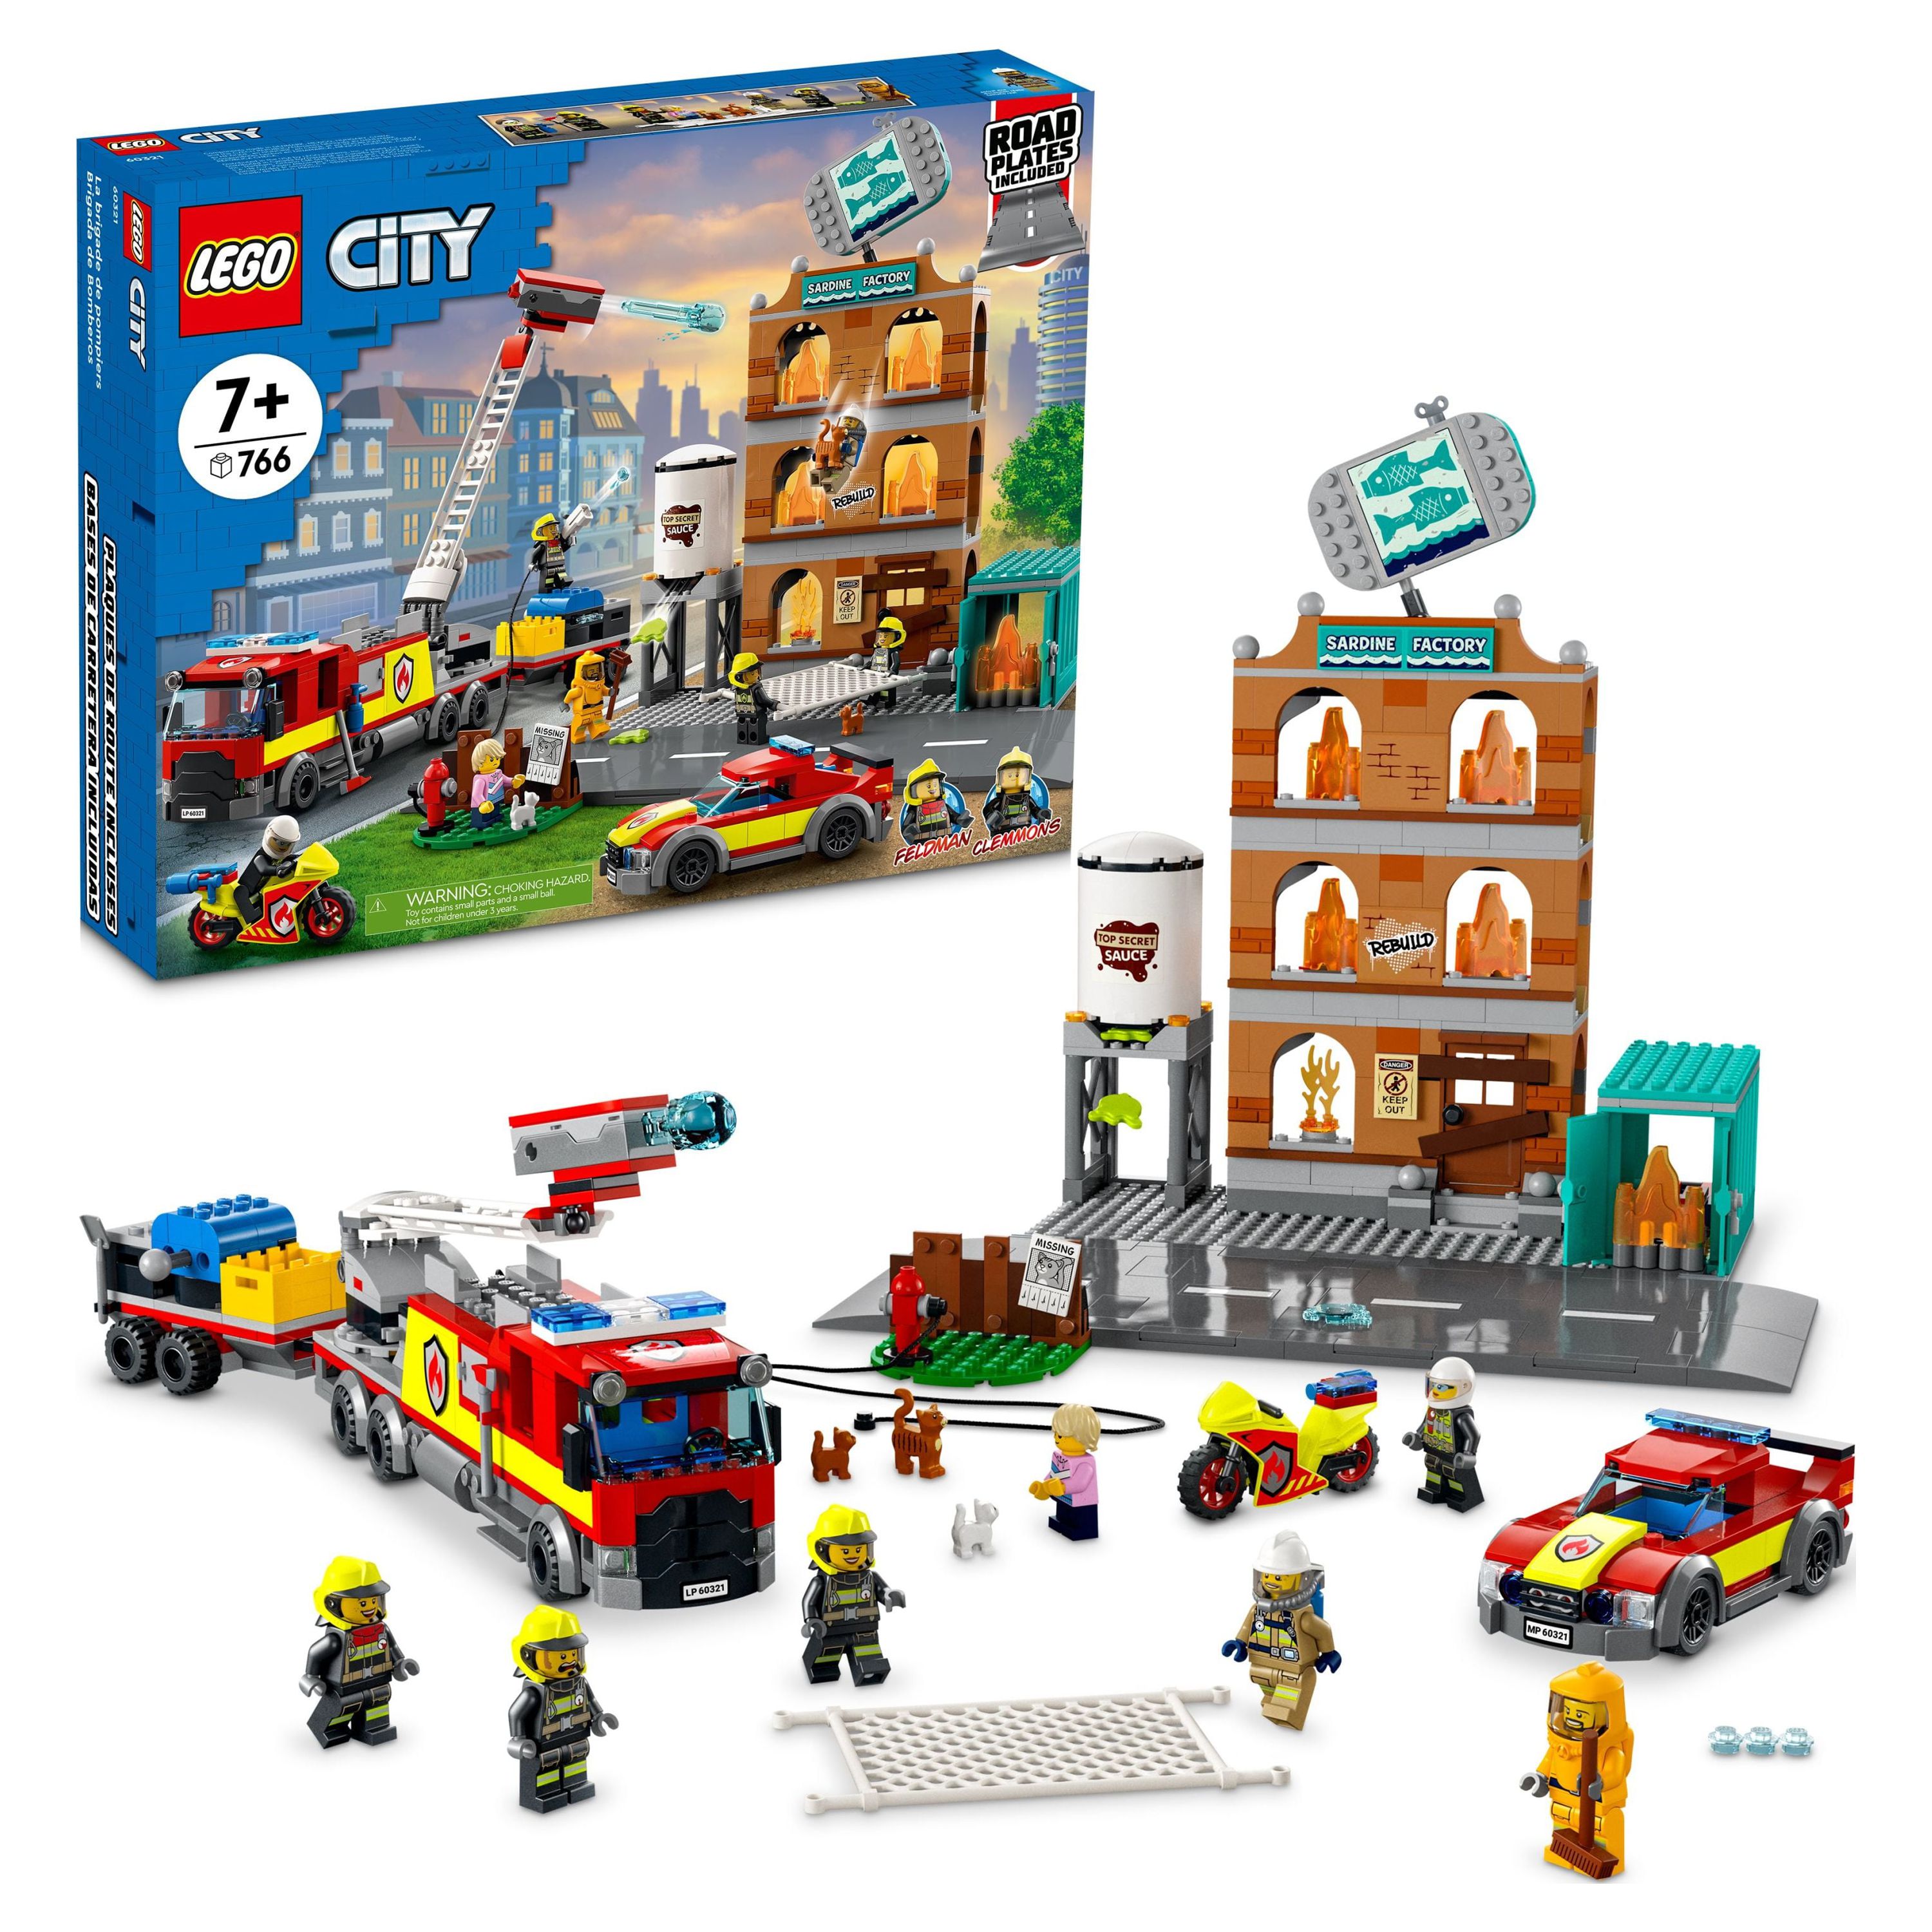 LEGO City Fire Brigade 60321 Building Set with Toy Fire Truck and Five Minifigures. Pretend Play Fire Engine Toy for Kids, Boys, and Girls Ages 7+ - image 1 of 8